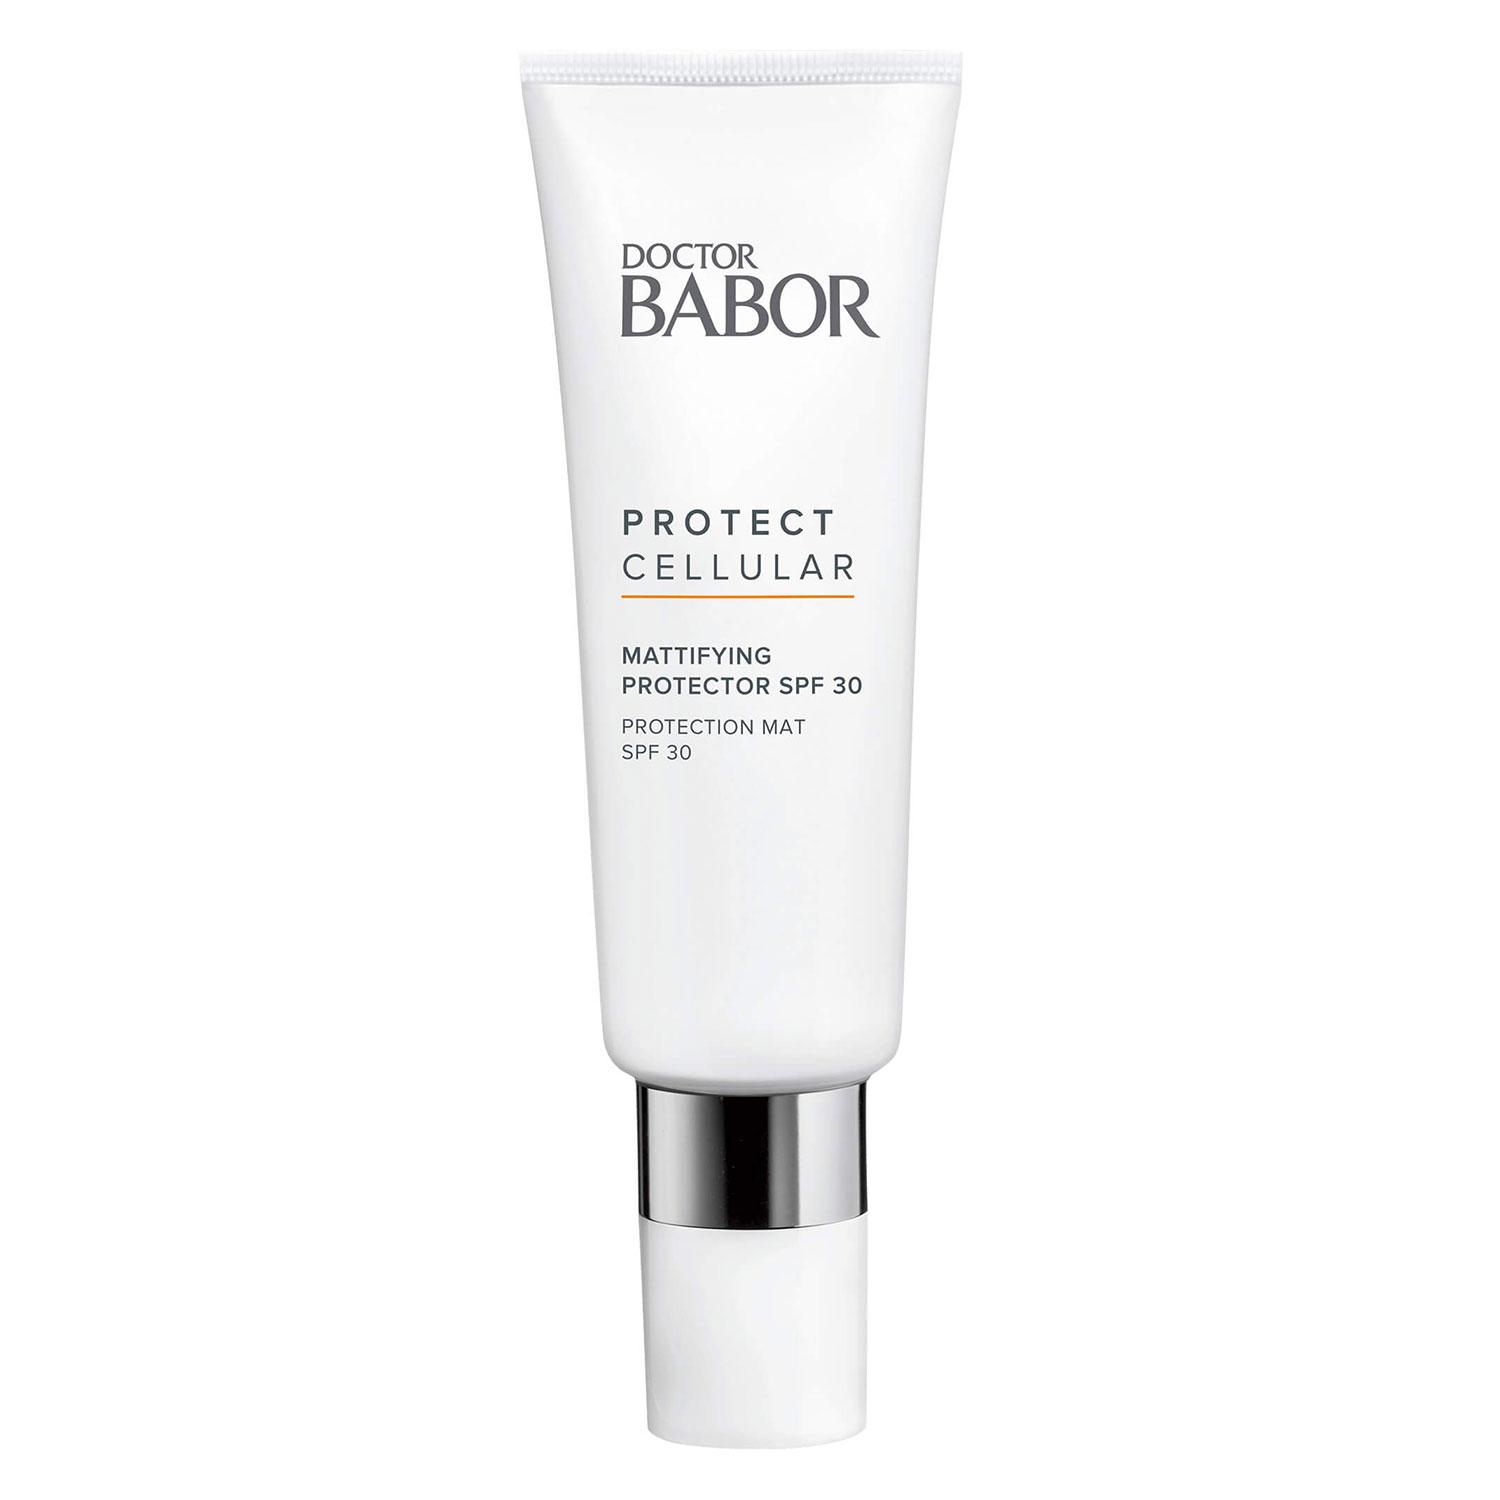 DOCTOR BABOR - Face Protecting Fluid SPF 30